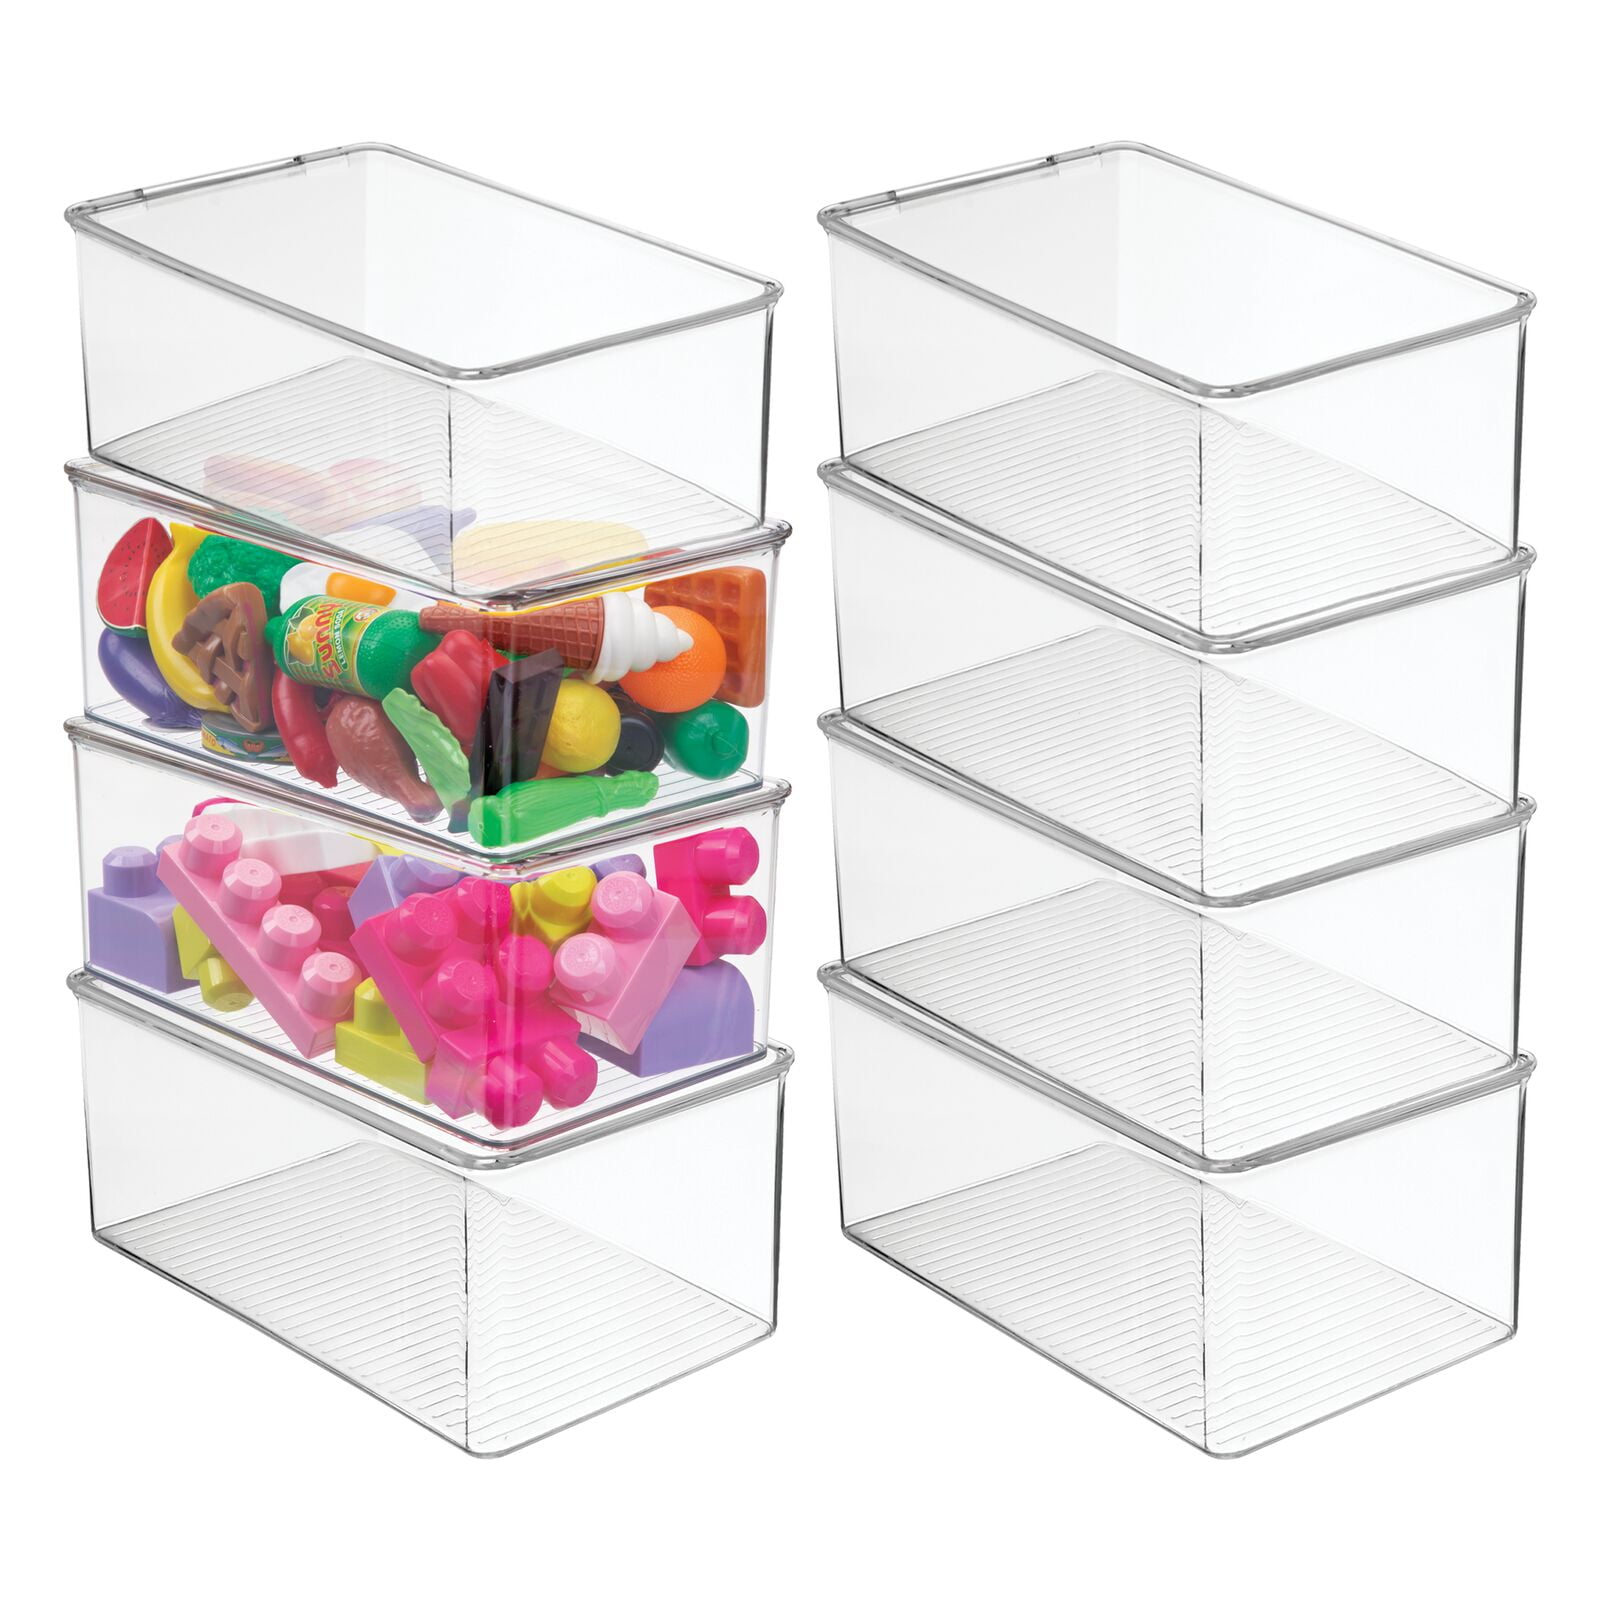 Luxor Small Stackable Plastic Storage Bins, 8-Pack